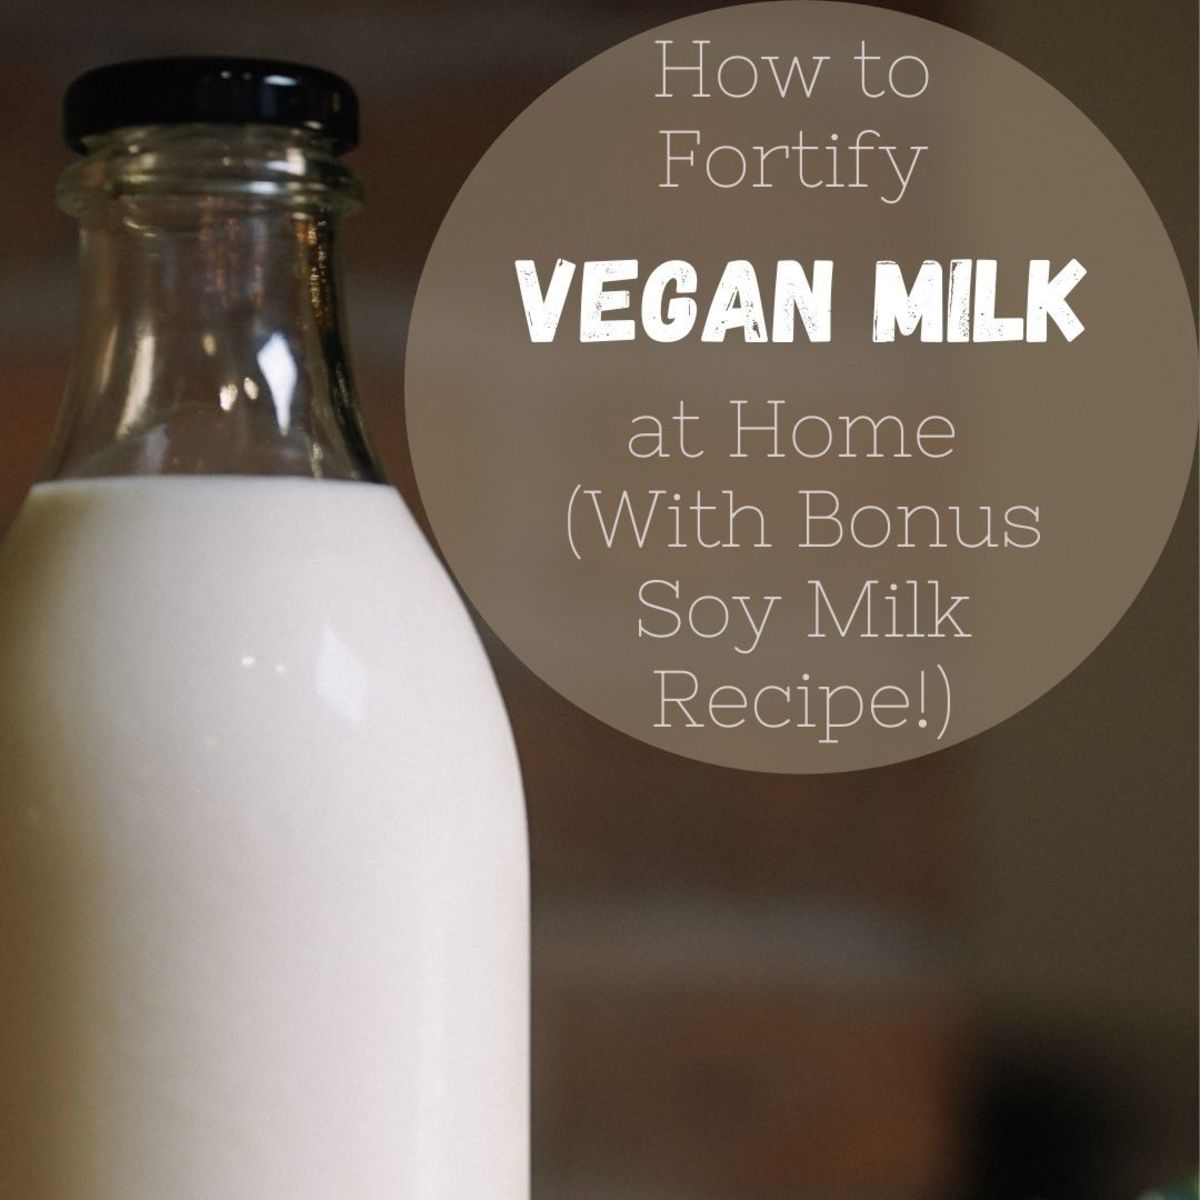 How to Fortify Vegan Milk at Home